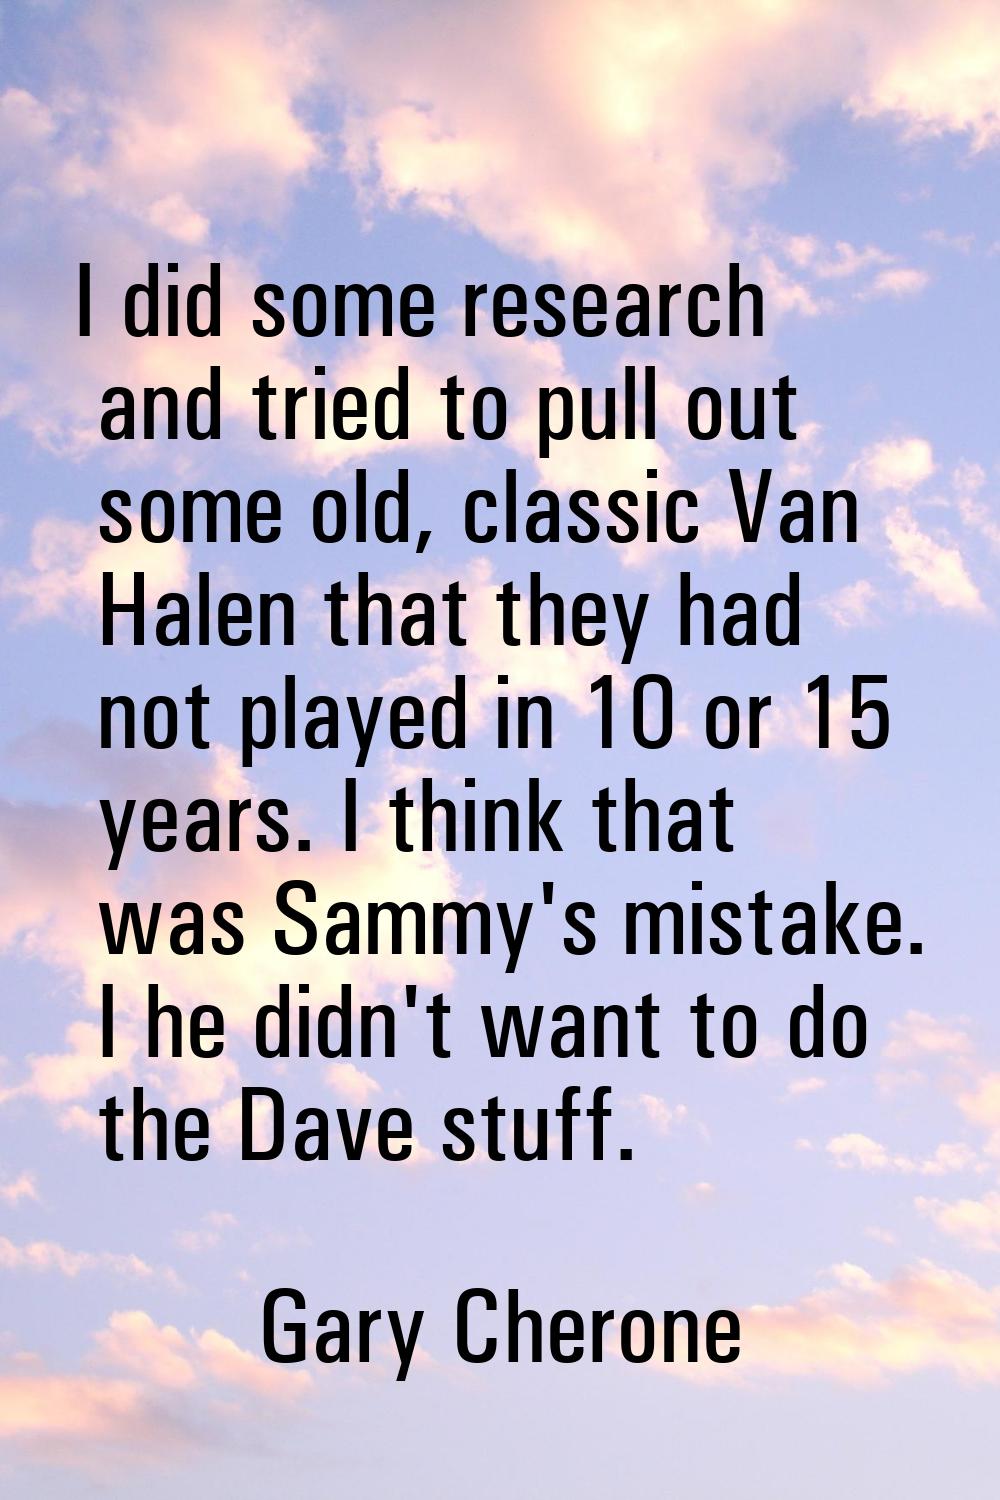 I did some research and tried to pull out some old, classic Van Halen that they had not played in 1